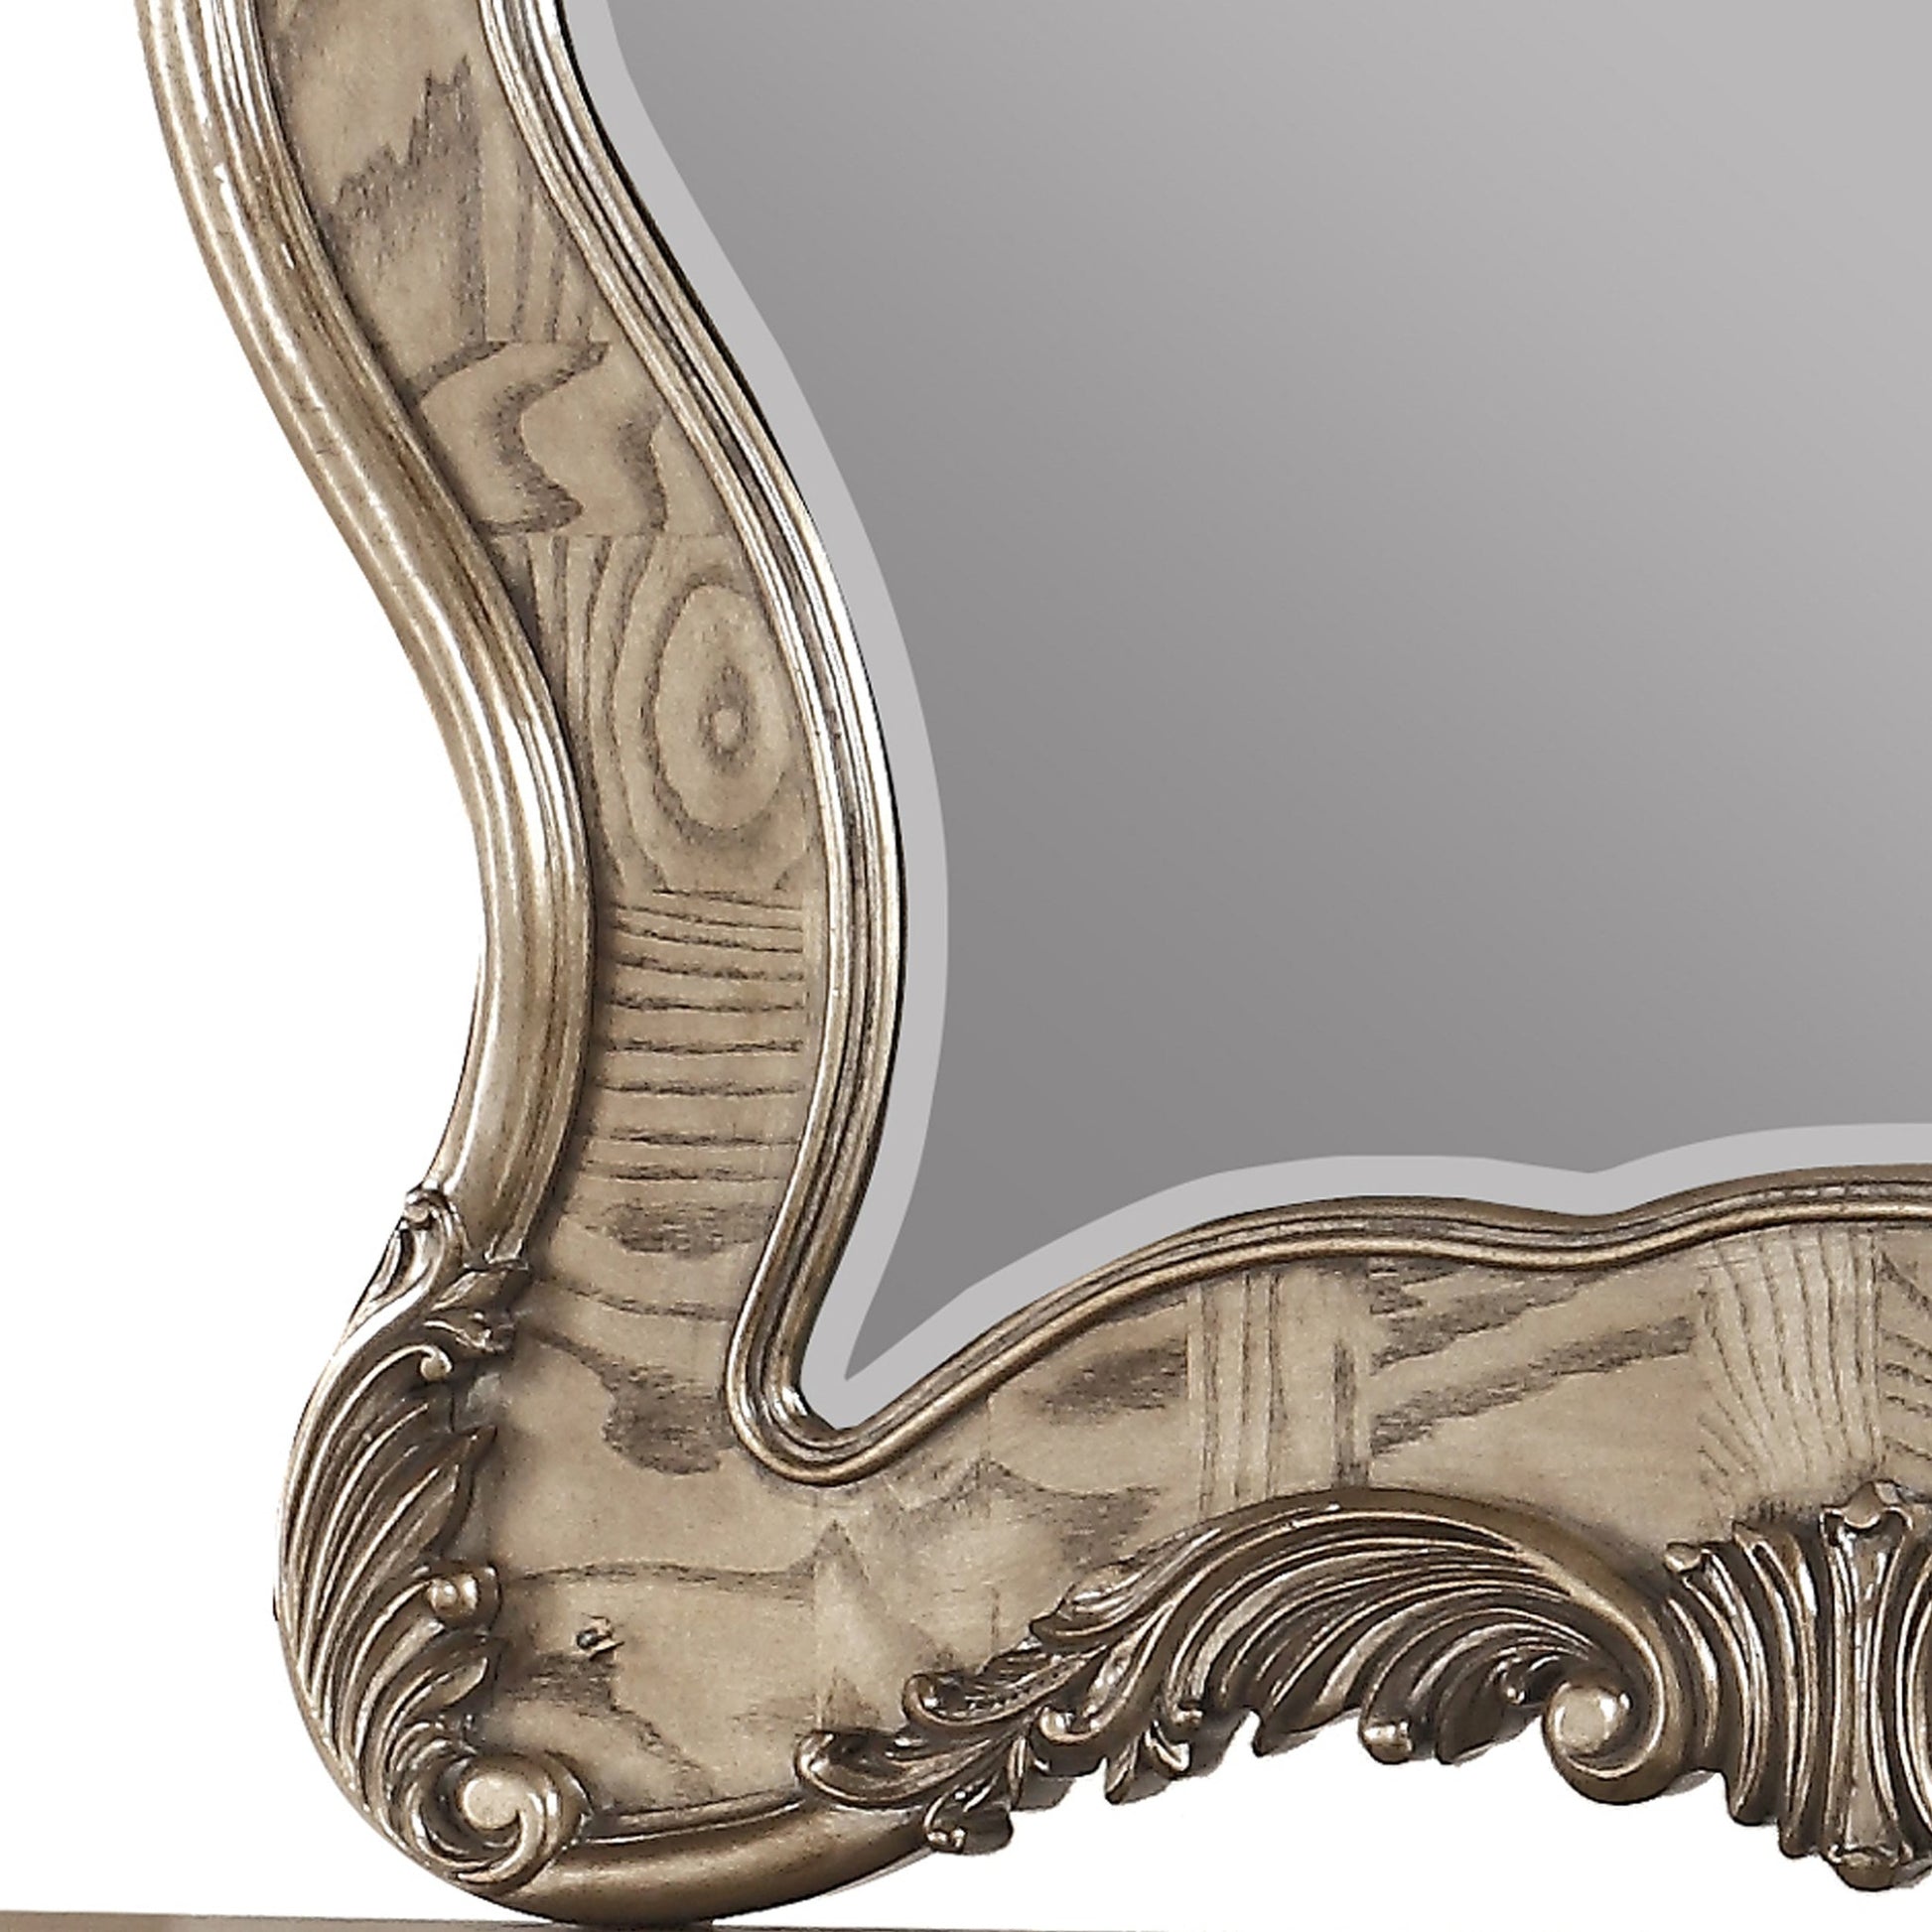 Benzara 48" Brown and Silver Wooden Mirror With Scrollwork Crown and Trim Details